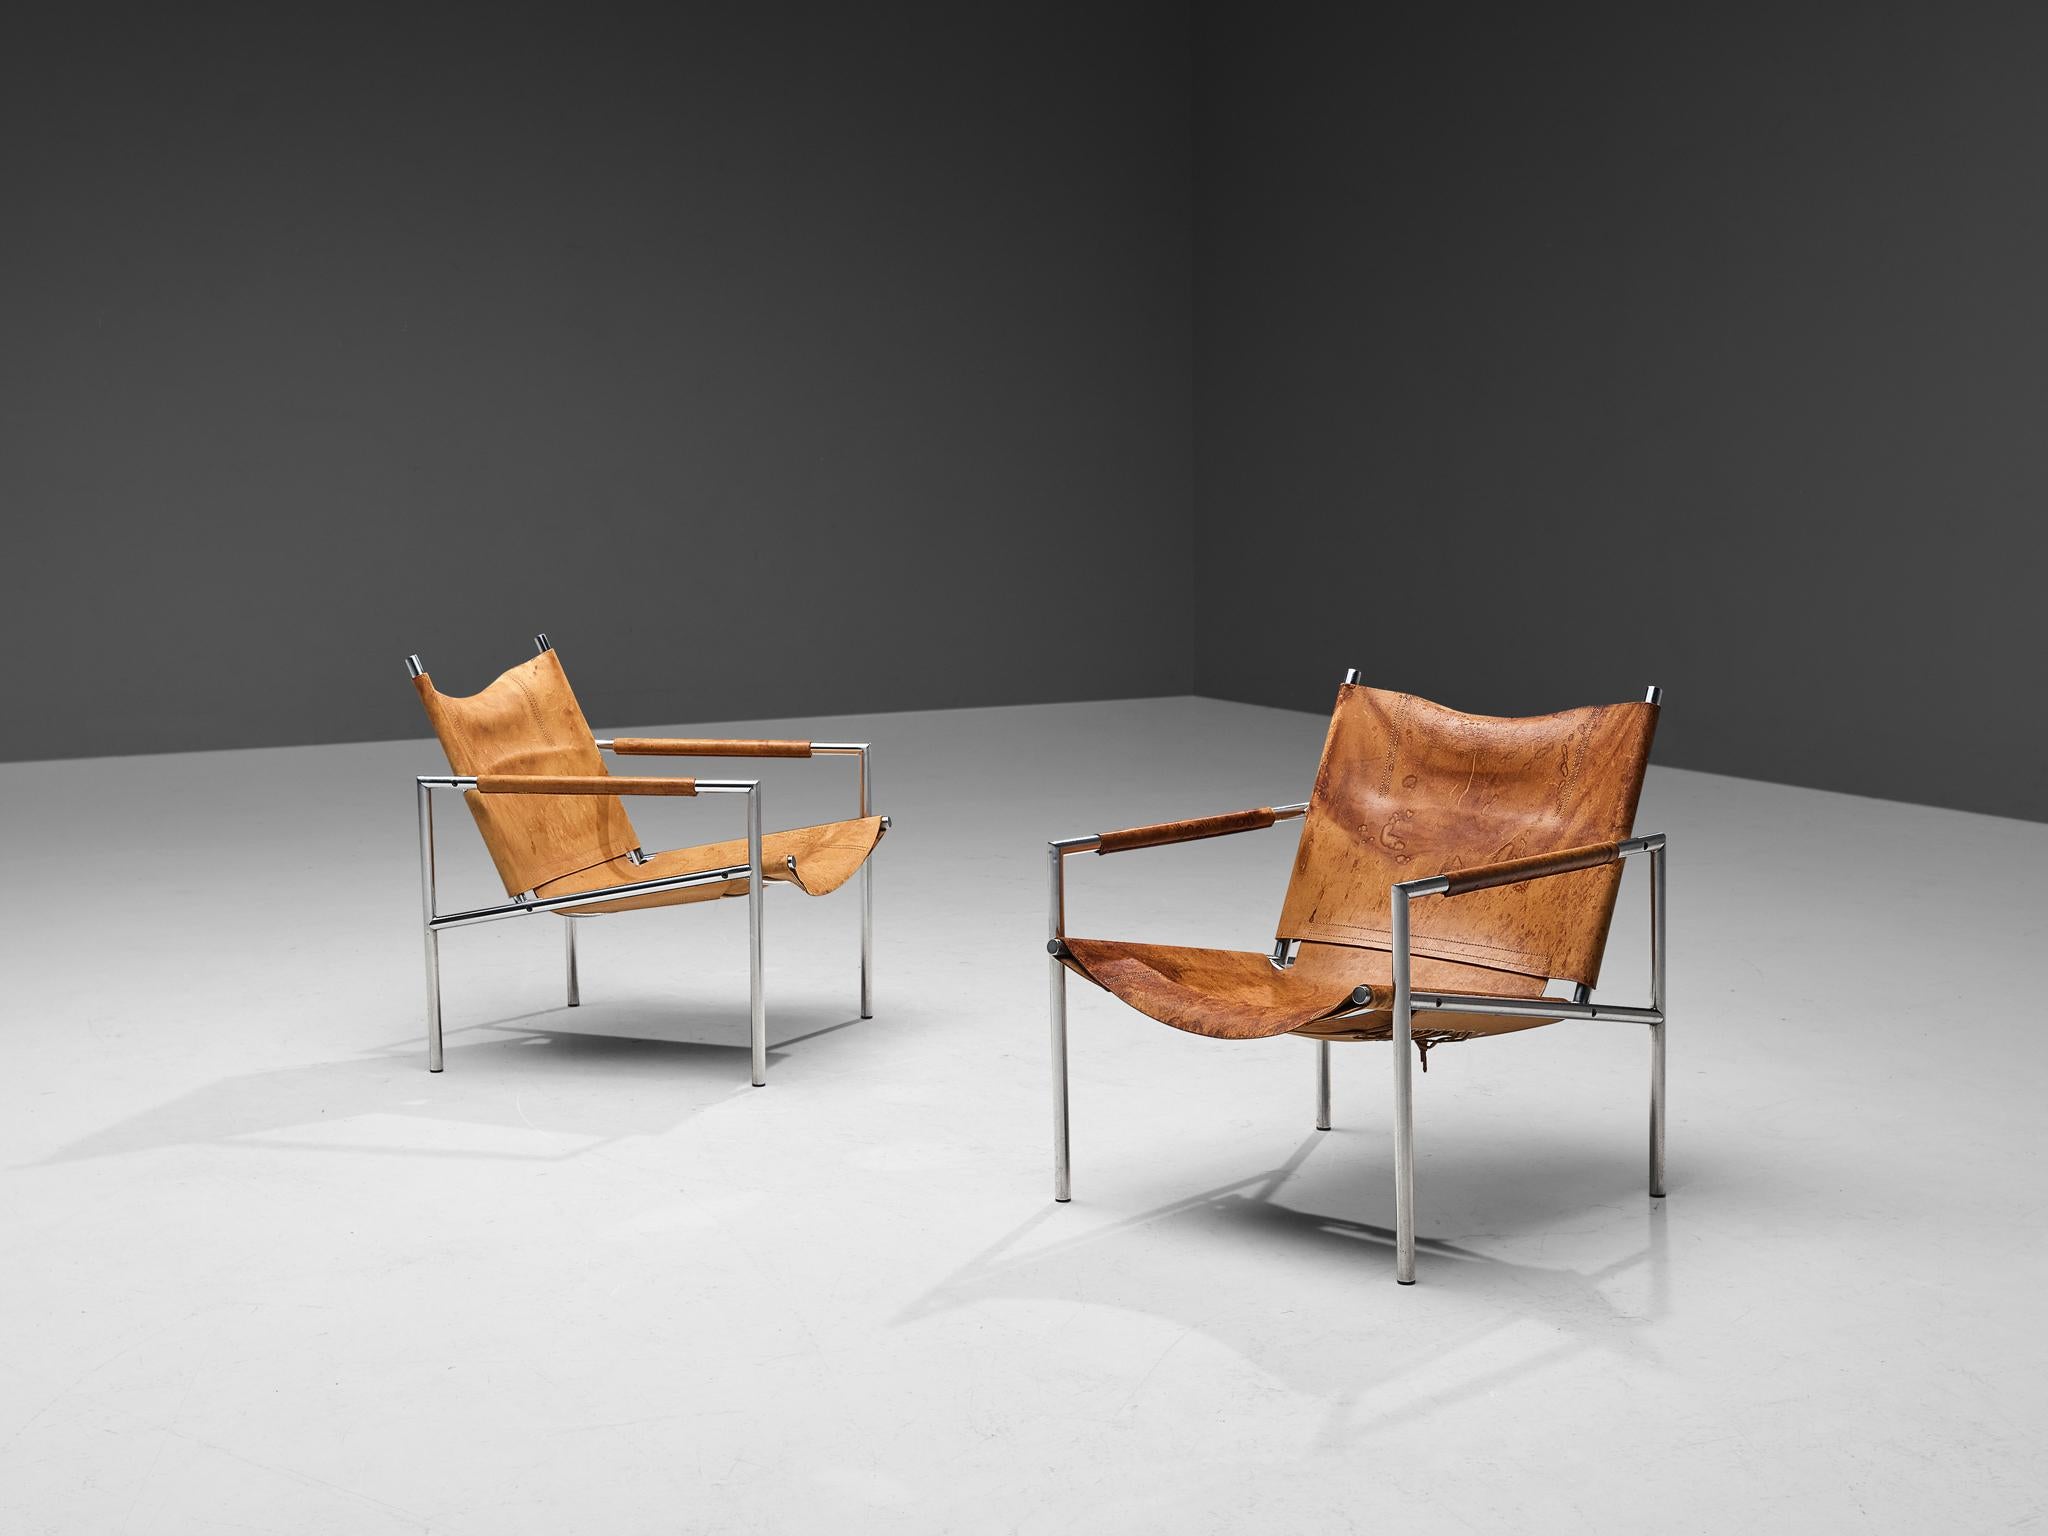 Martin Visser for 't Spectrum Bergeijk, pair of lounge chairs model 'SZ 02', leather, brushed steel, The Netherlands, 1965

These modern, Minimalist easy chairs are made of a tubular brushed steel in combination with soft, patinated cognac leather